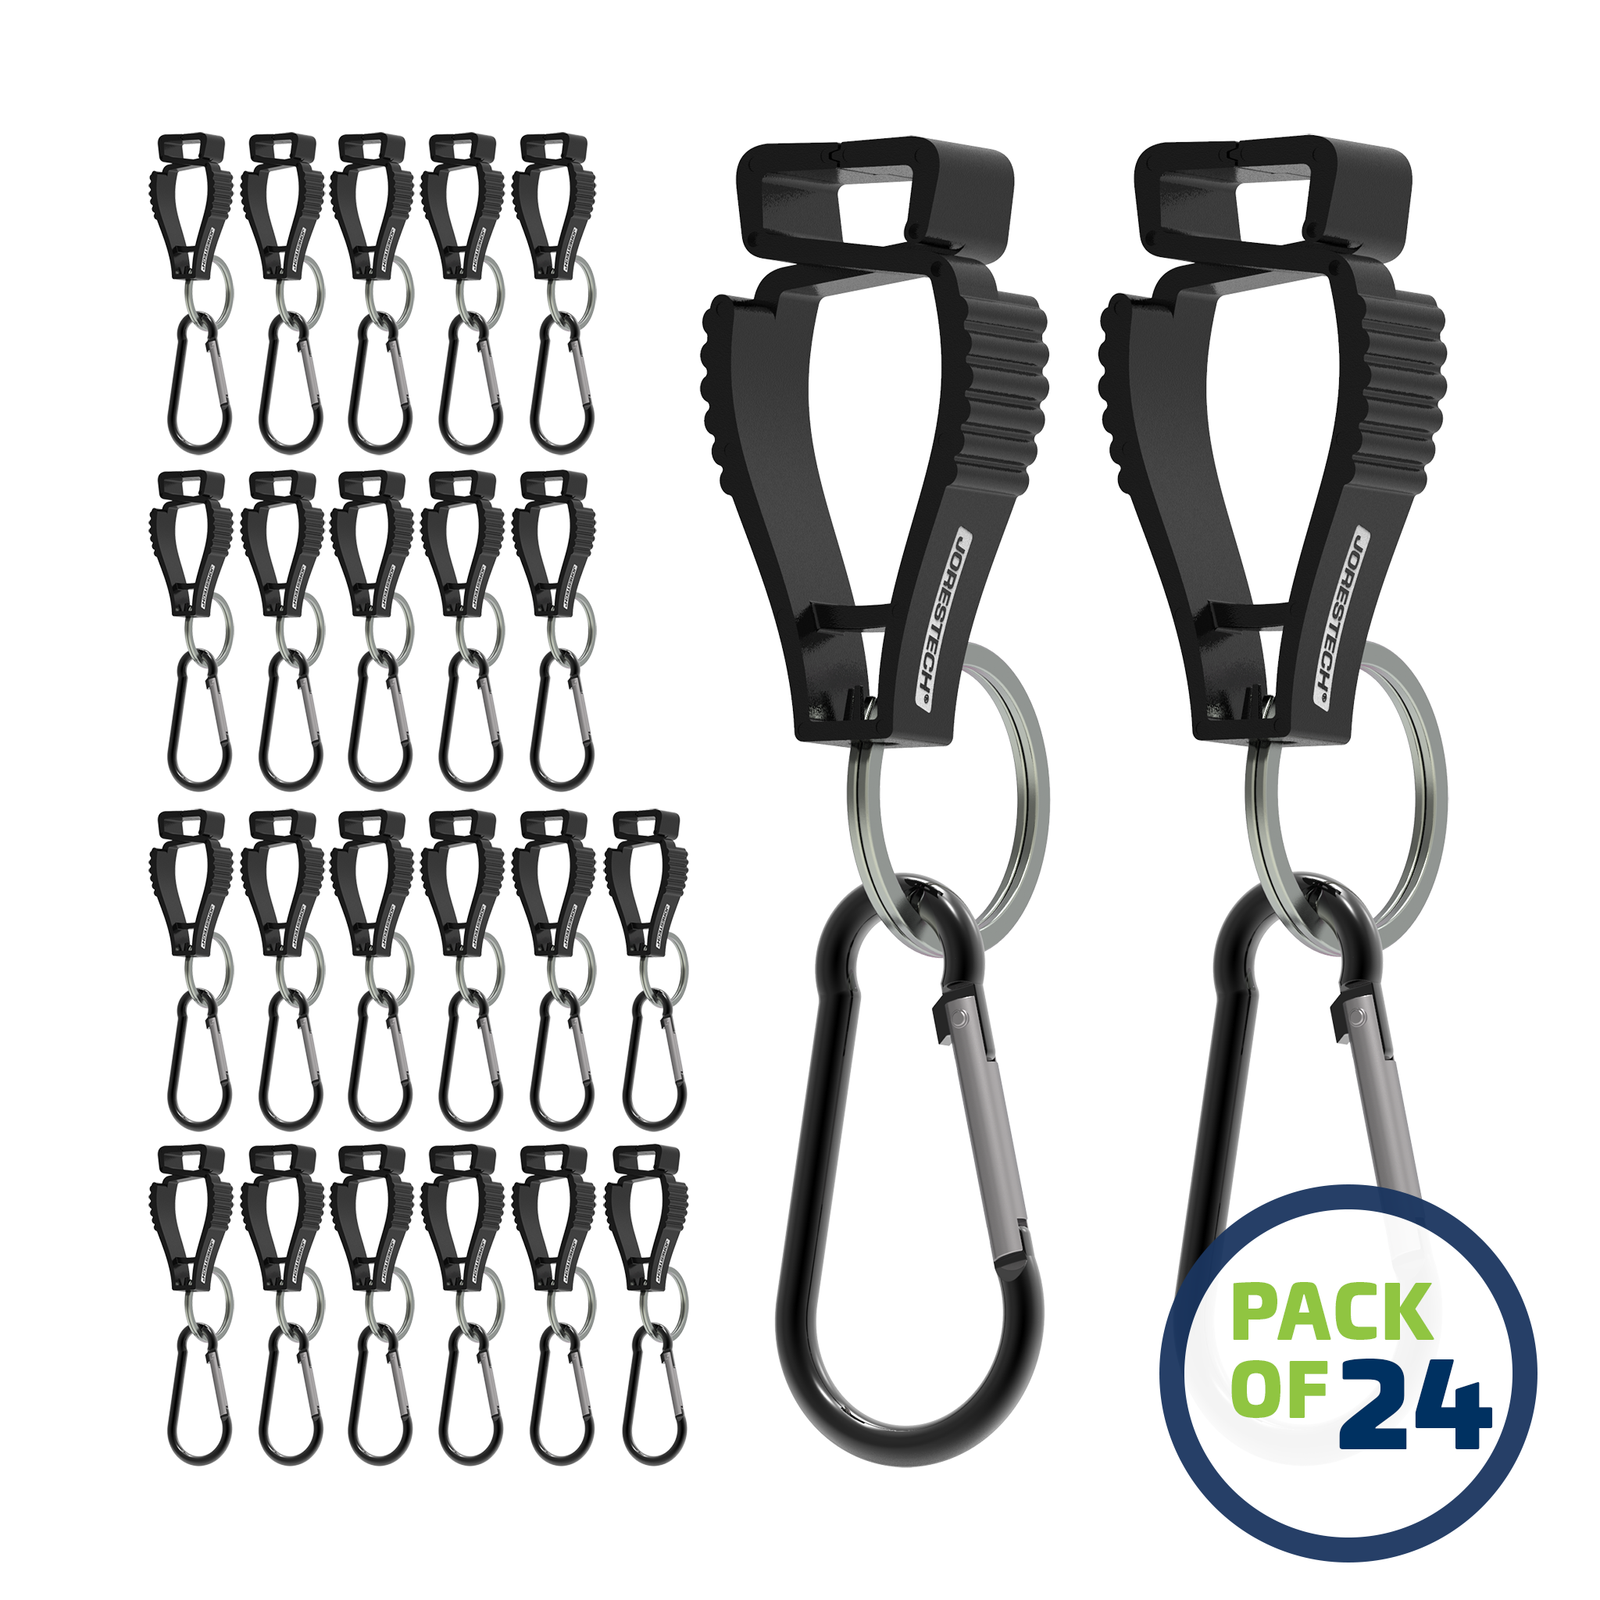 image of a pack of 24 Black JORESTECH glove clip safety holders with carabiner over white background